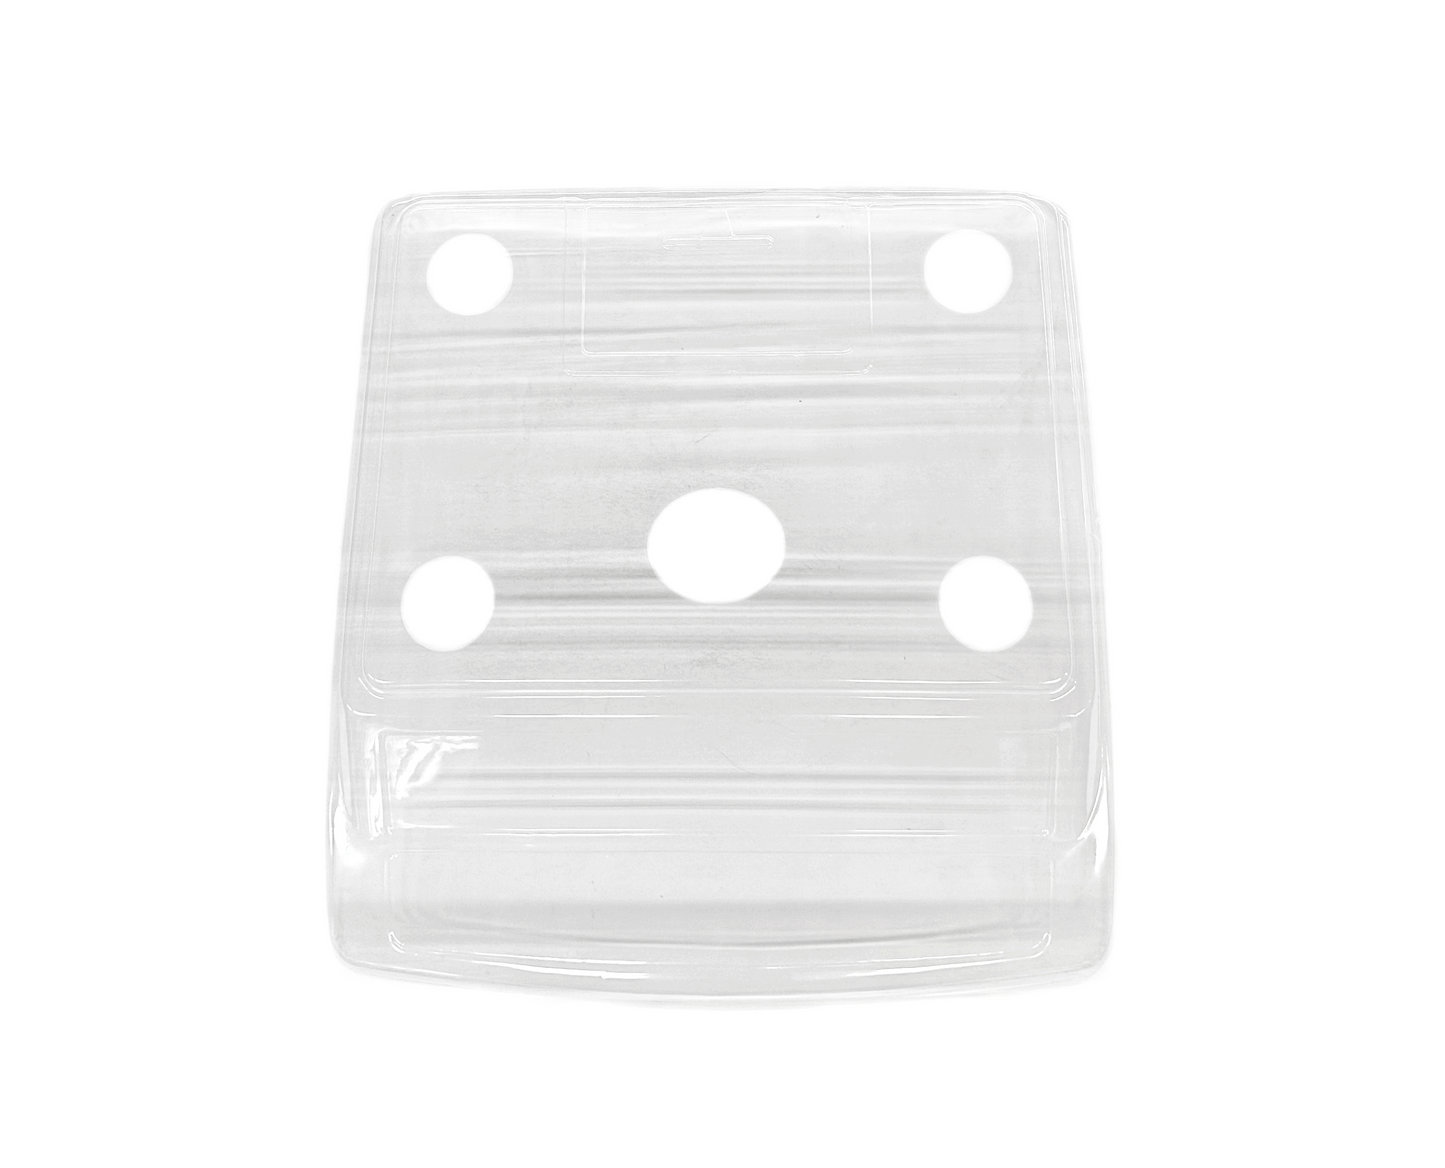 Easy Weigh CK-Series Scale Wet Cover